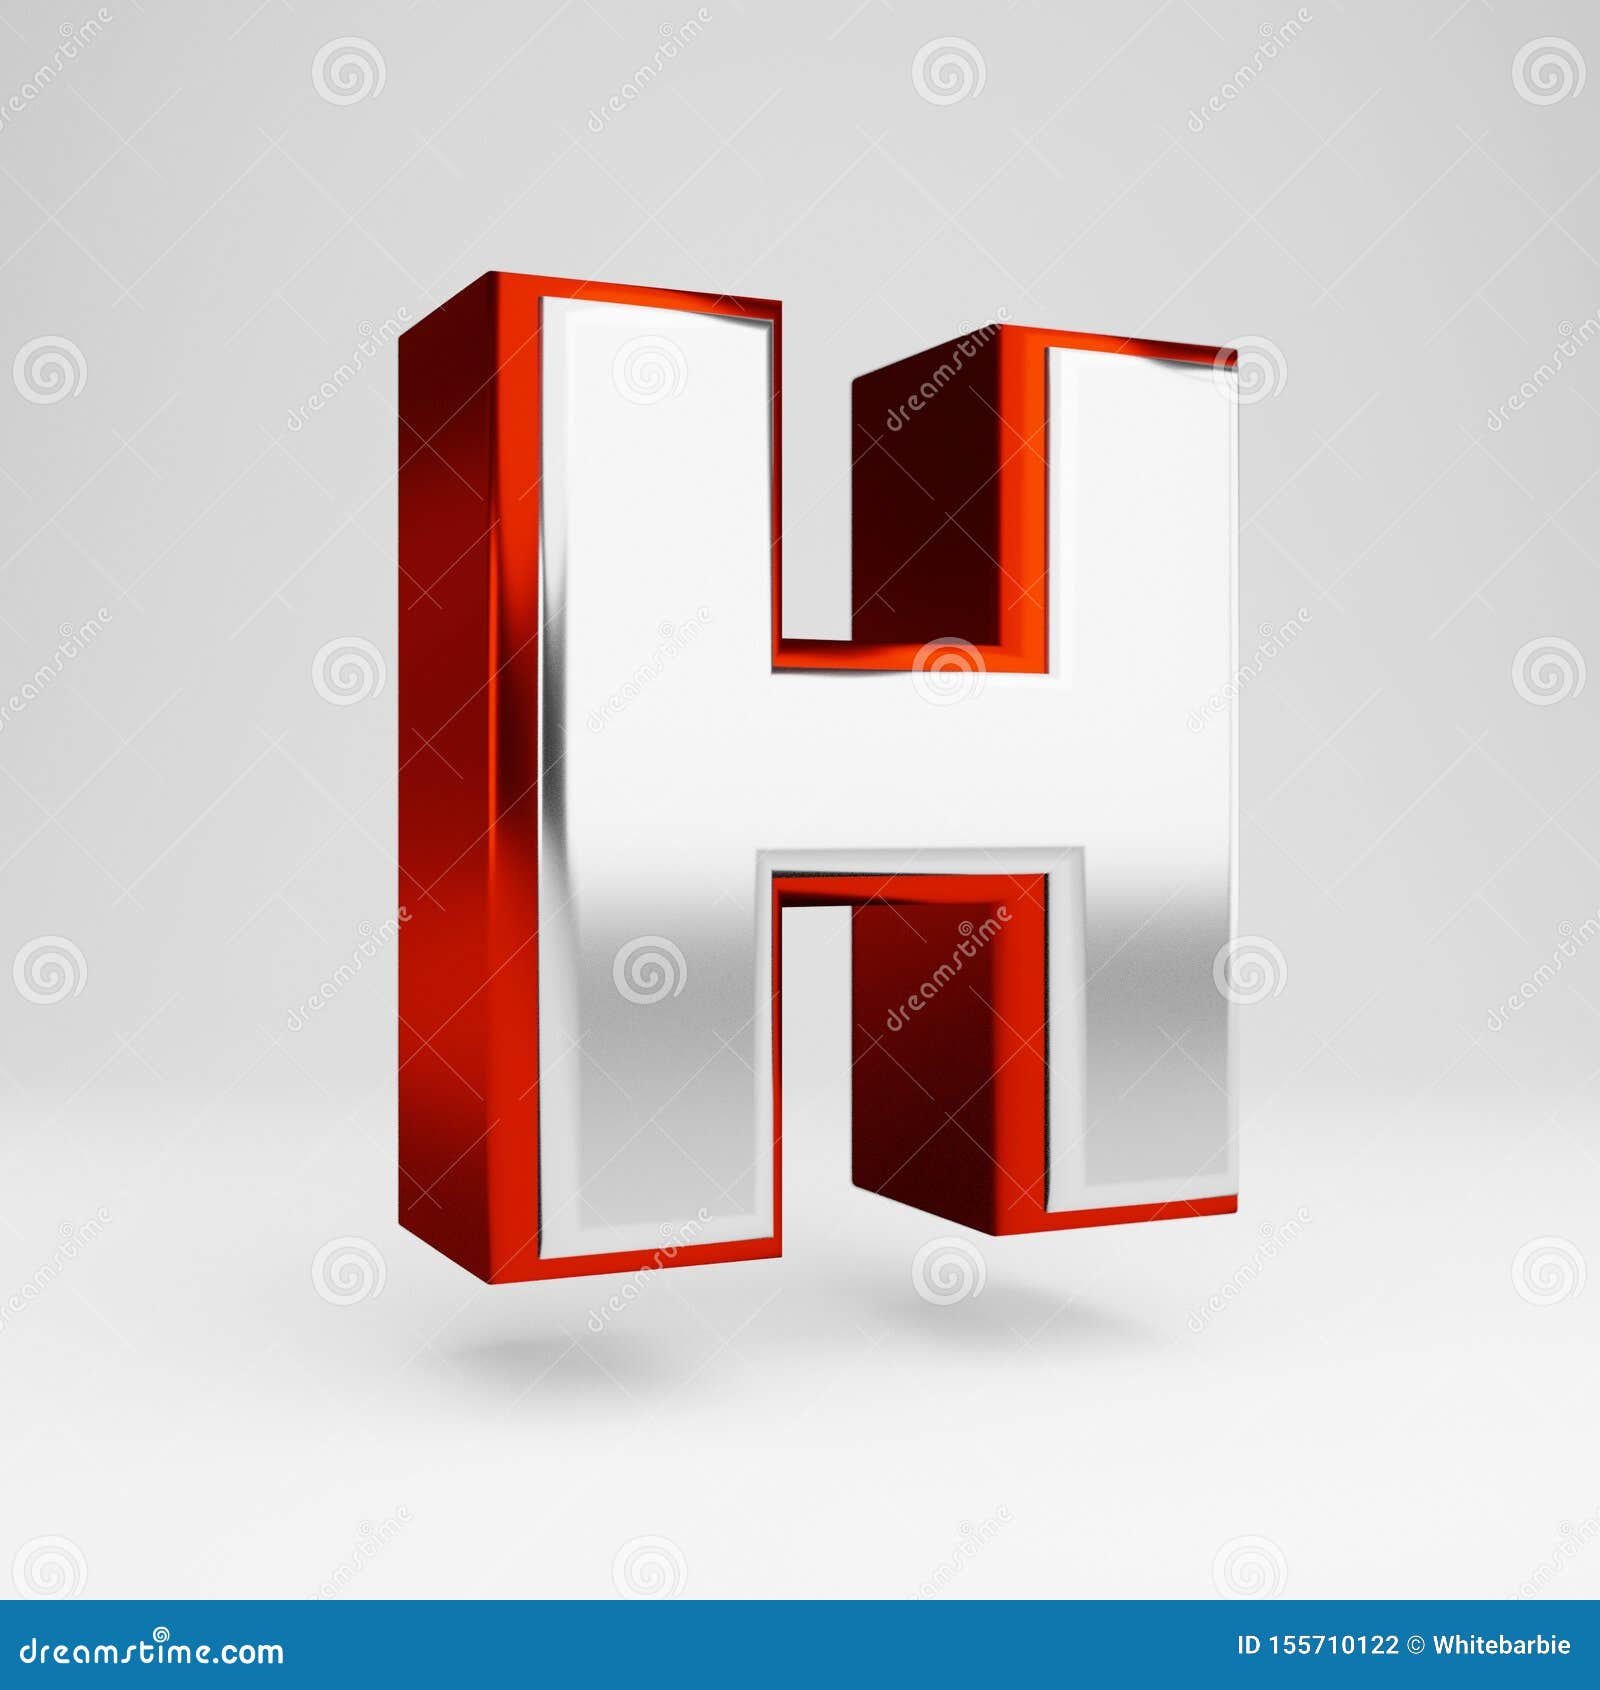 Metal 3d Letter H Uppercase. Metallic Red and White Font Isolated on ...